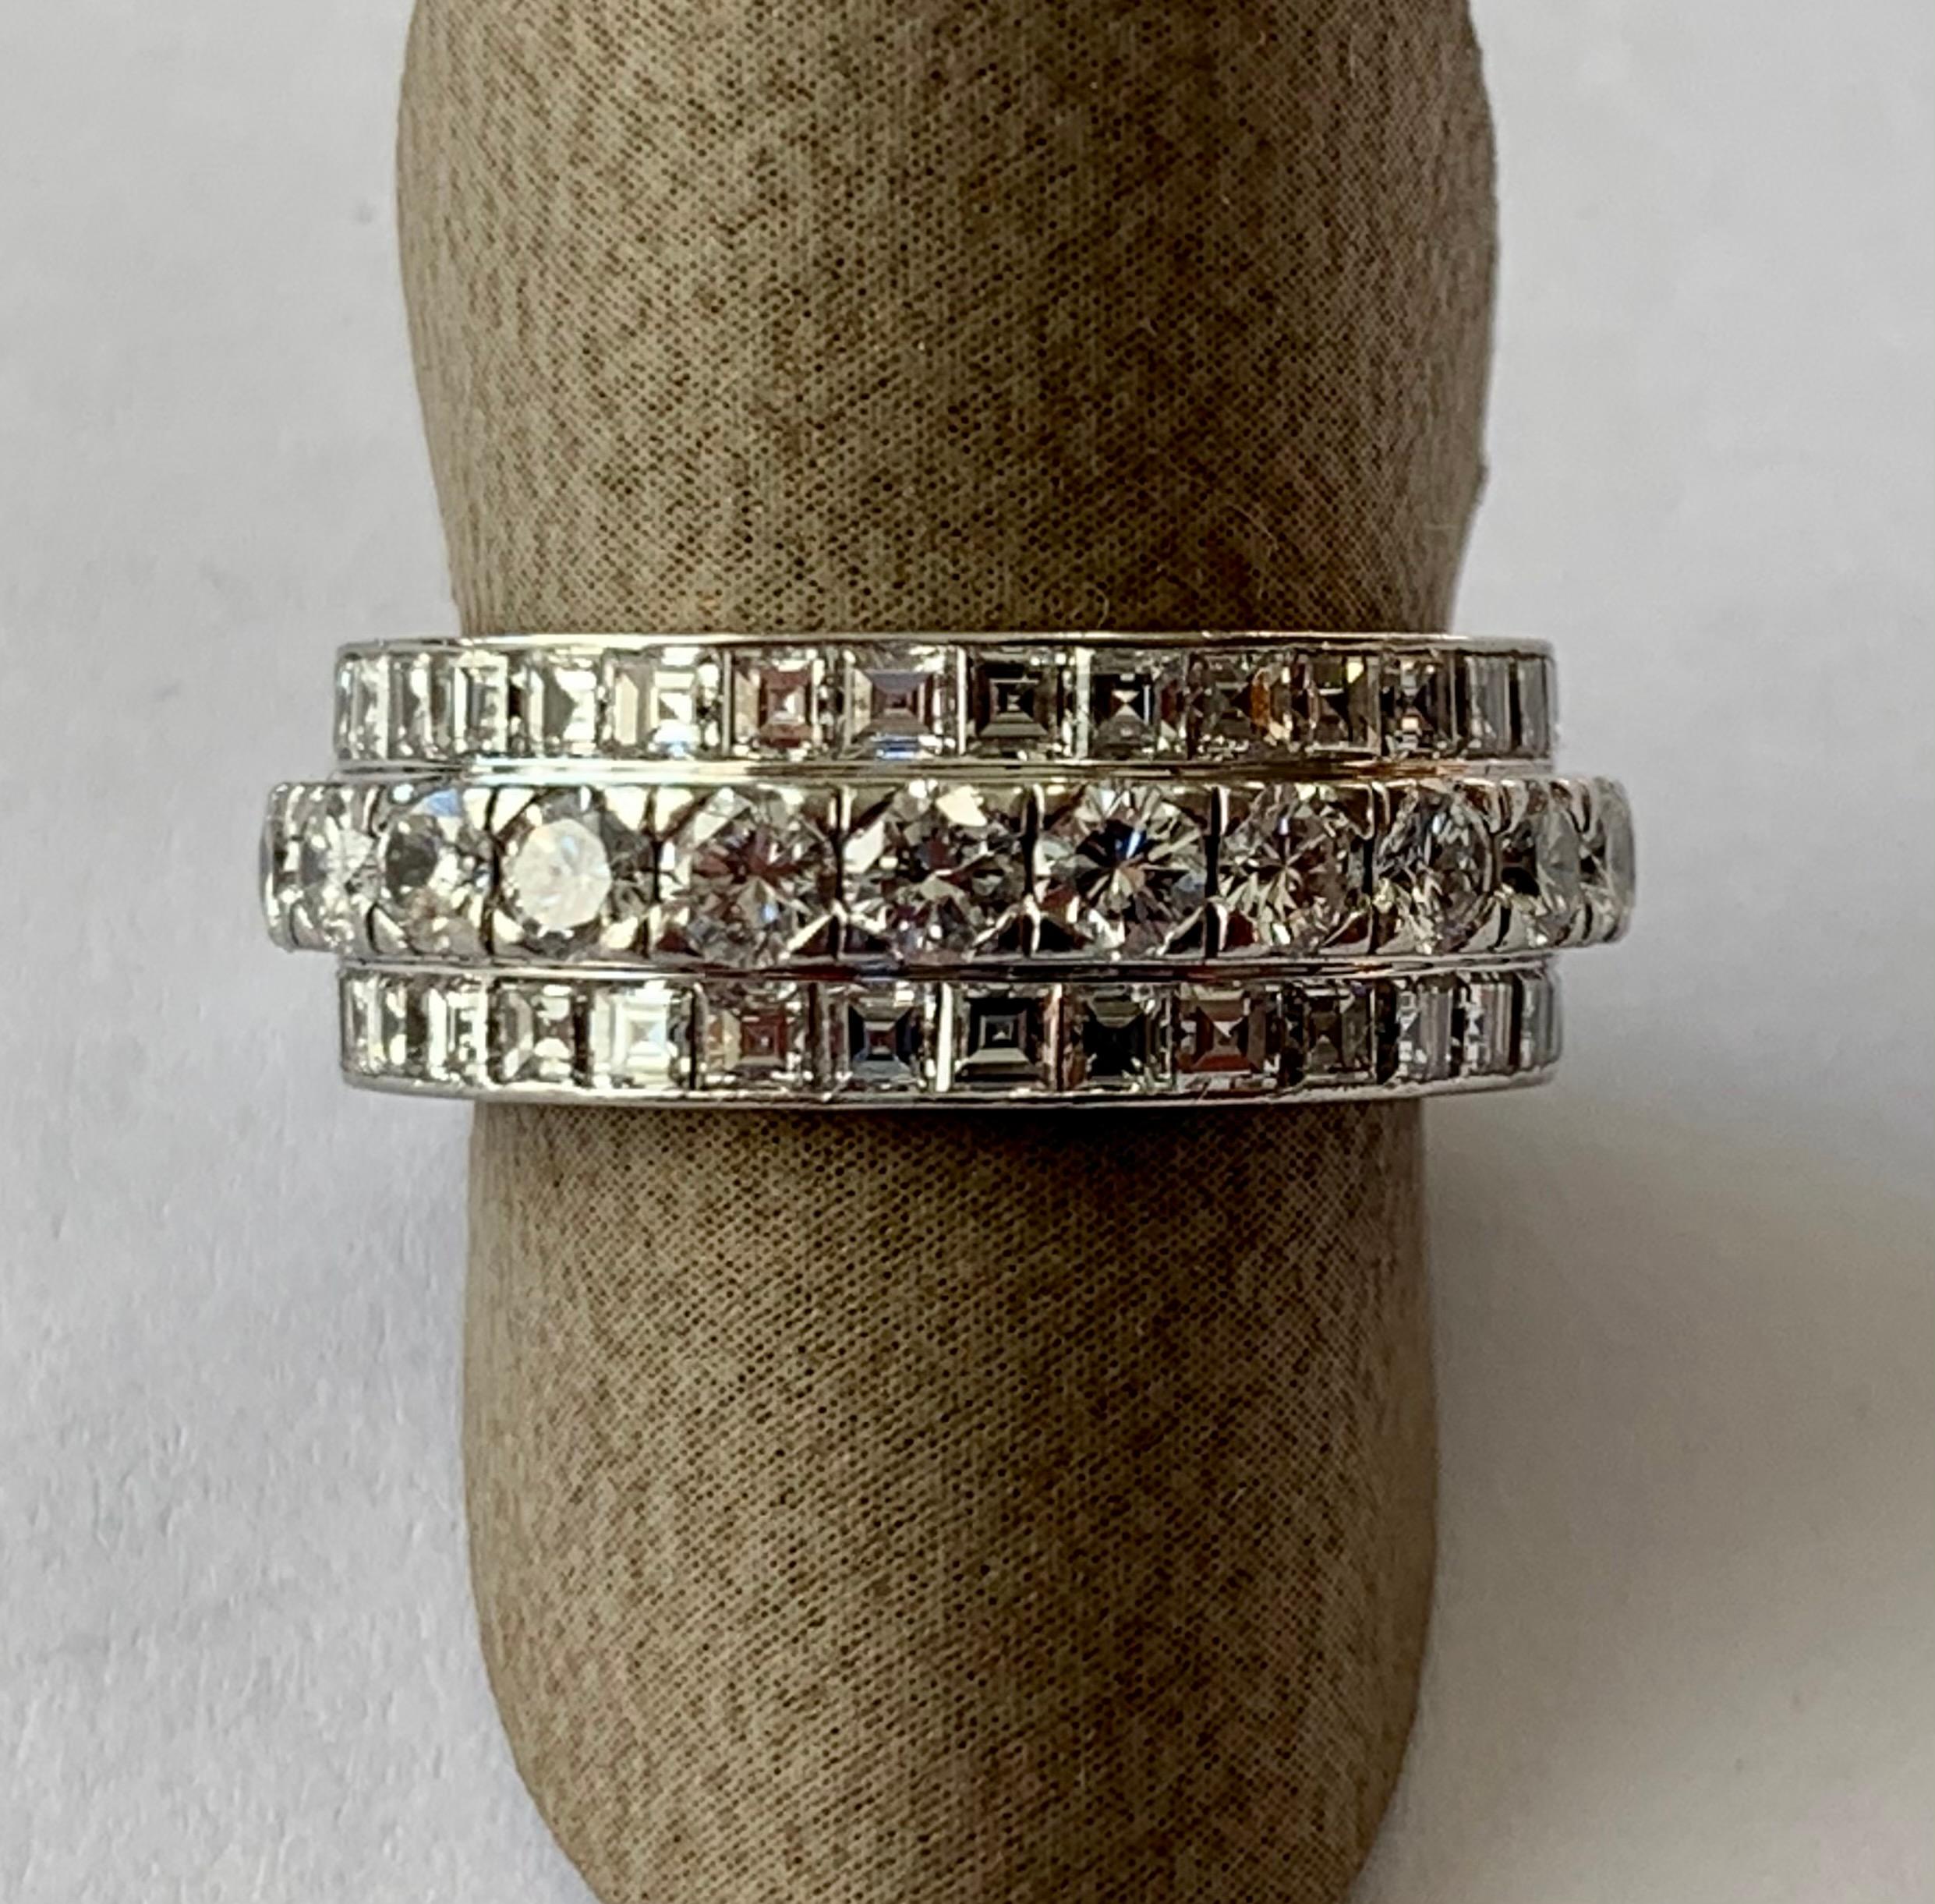 Stunning diamond eternity ring featuring high grade G colo andr vs clarity diamonds with a total weight of 4.50 ct. This ring features baguette and round brilliant cut diamonds in a beautiful design, with claw and channel settings in solid 18k white